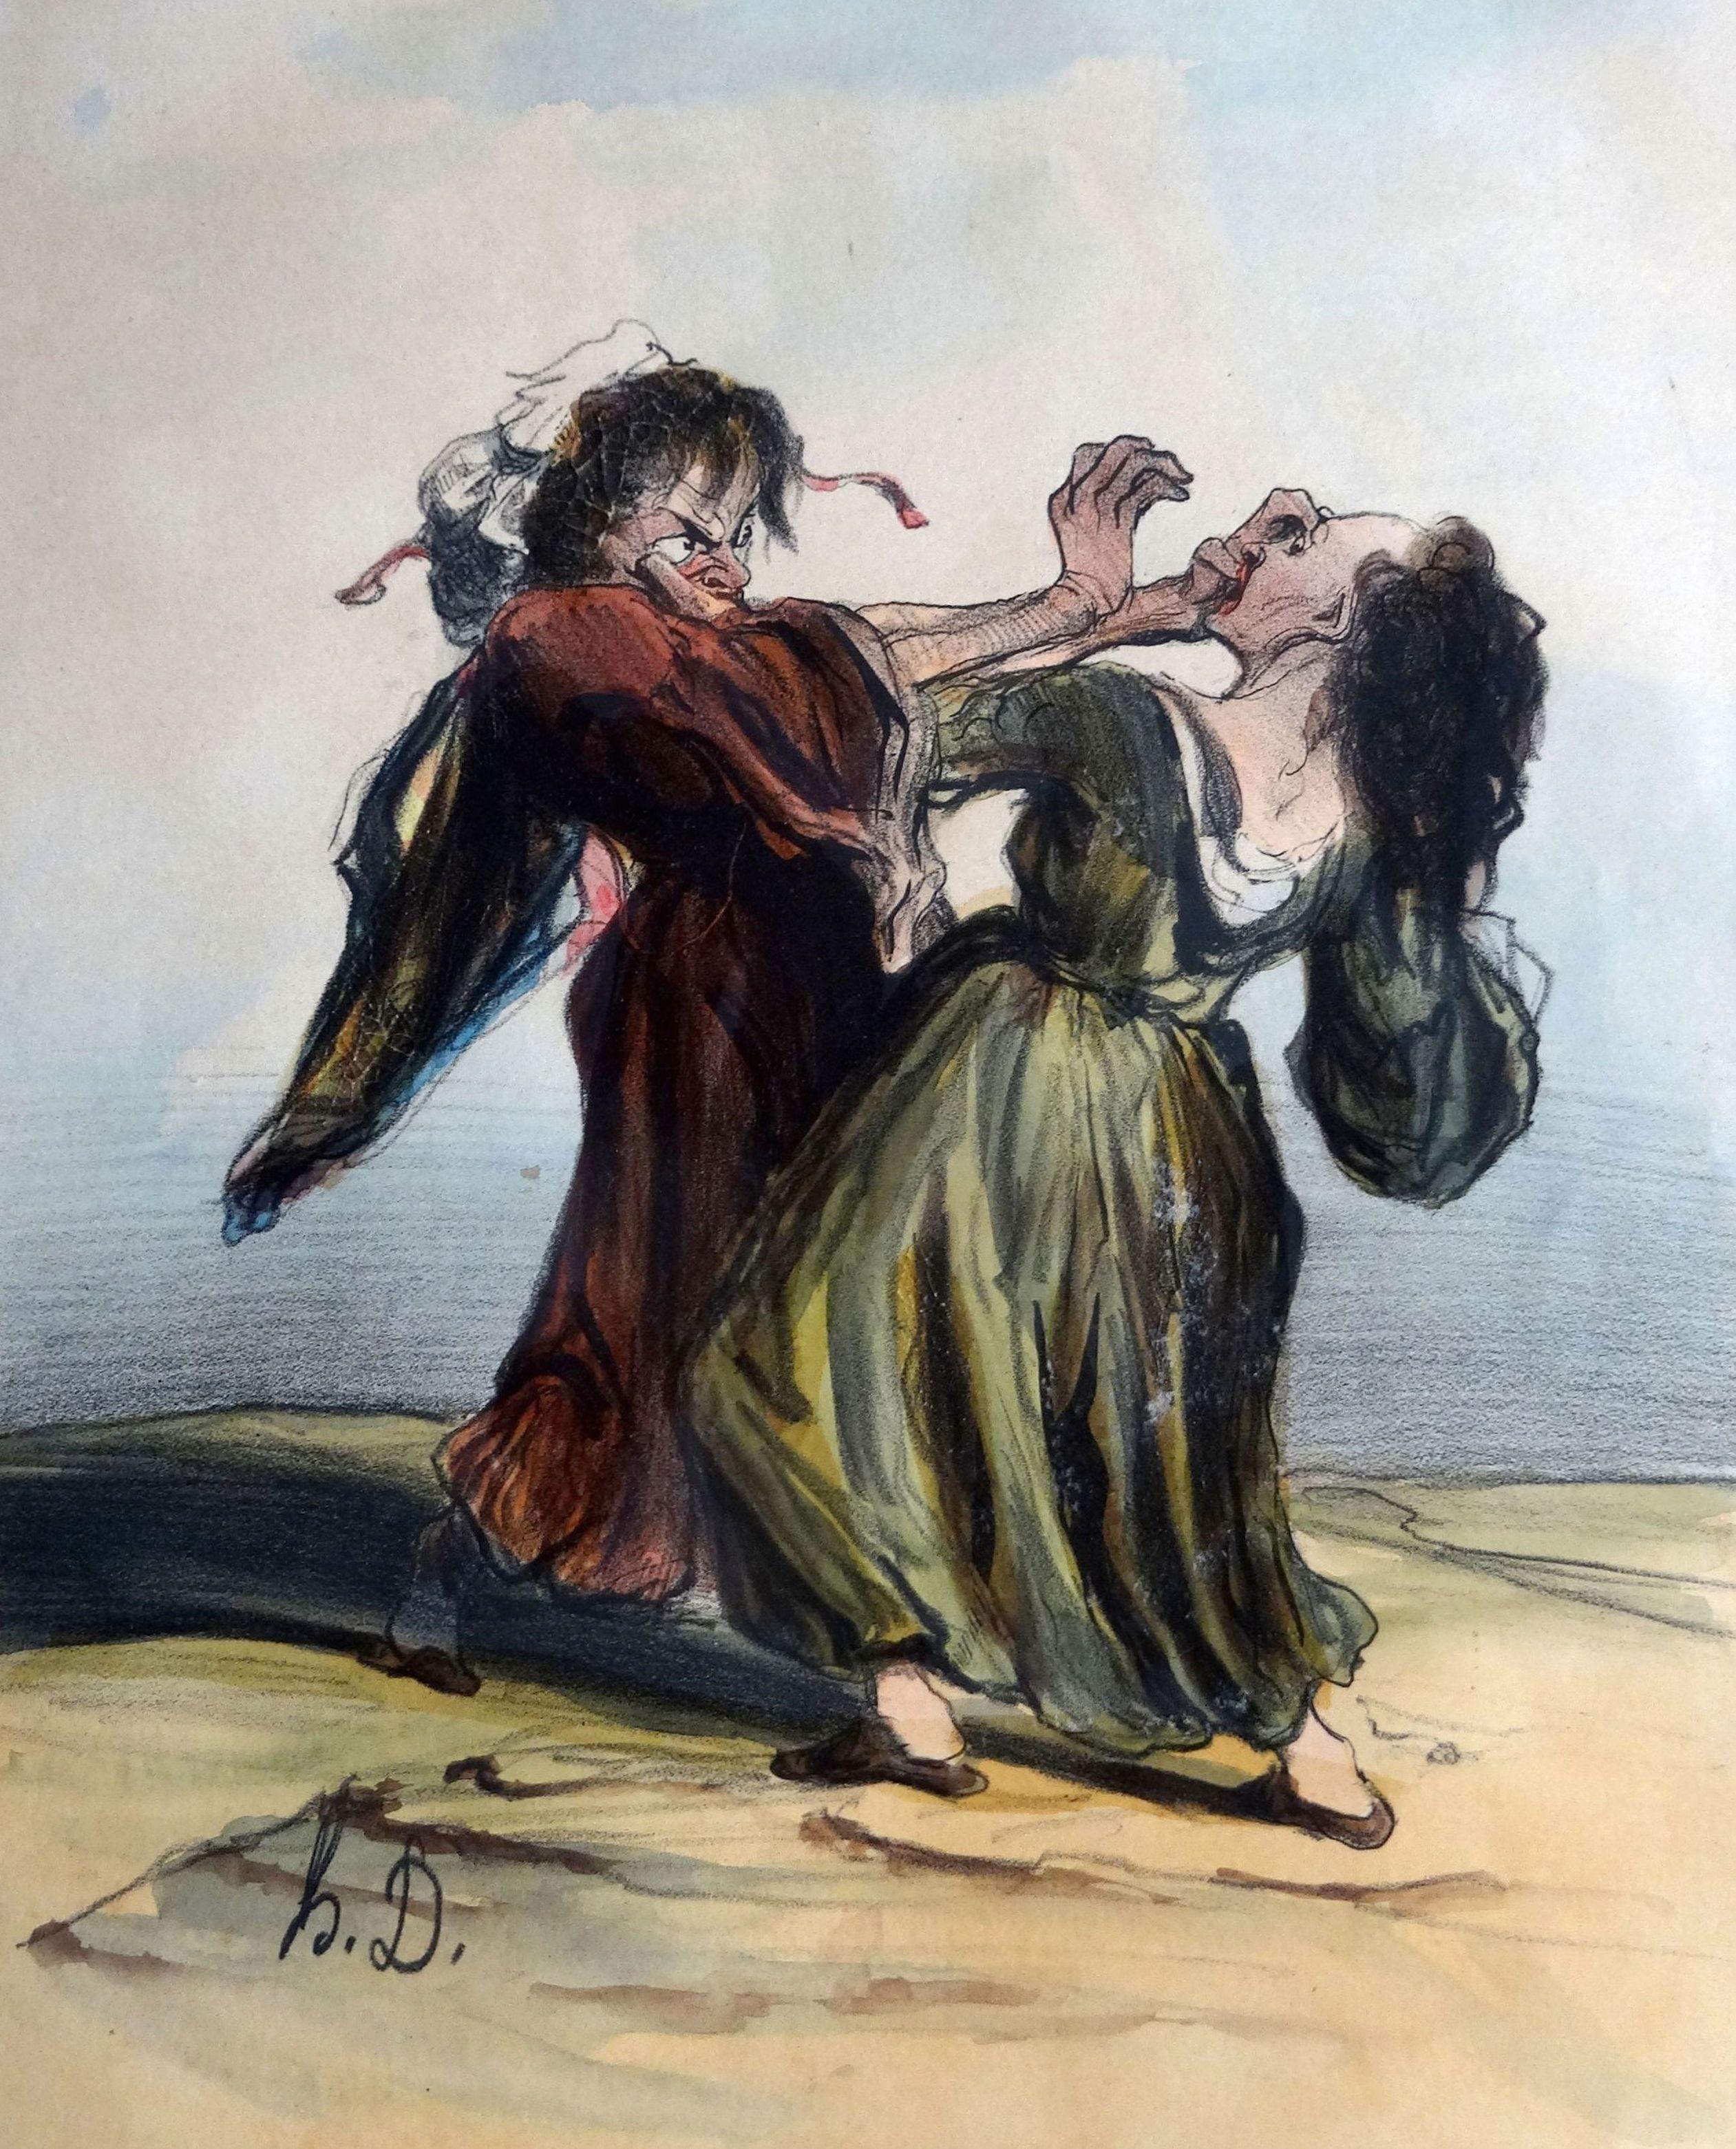 honore daumier caricature